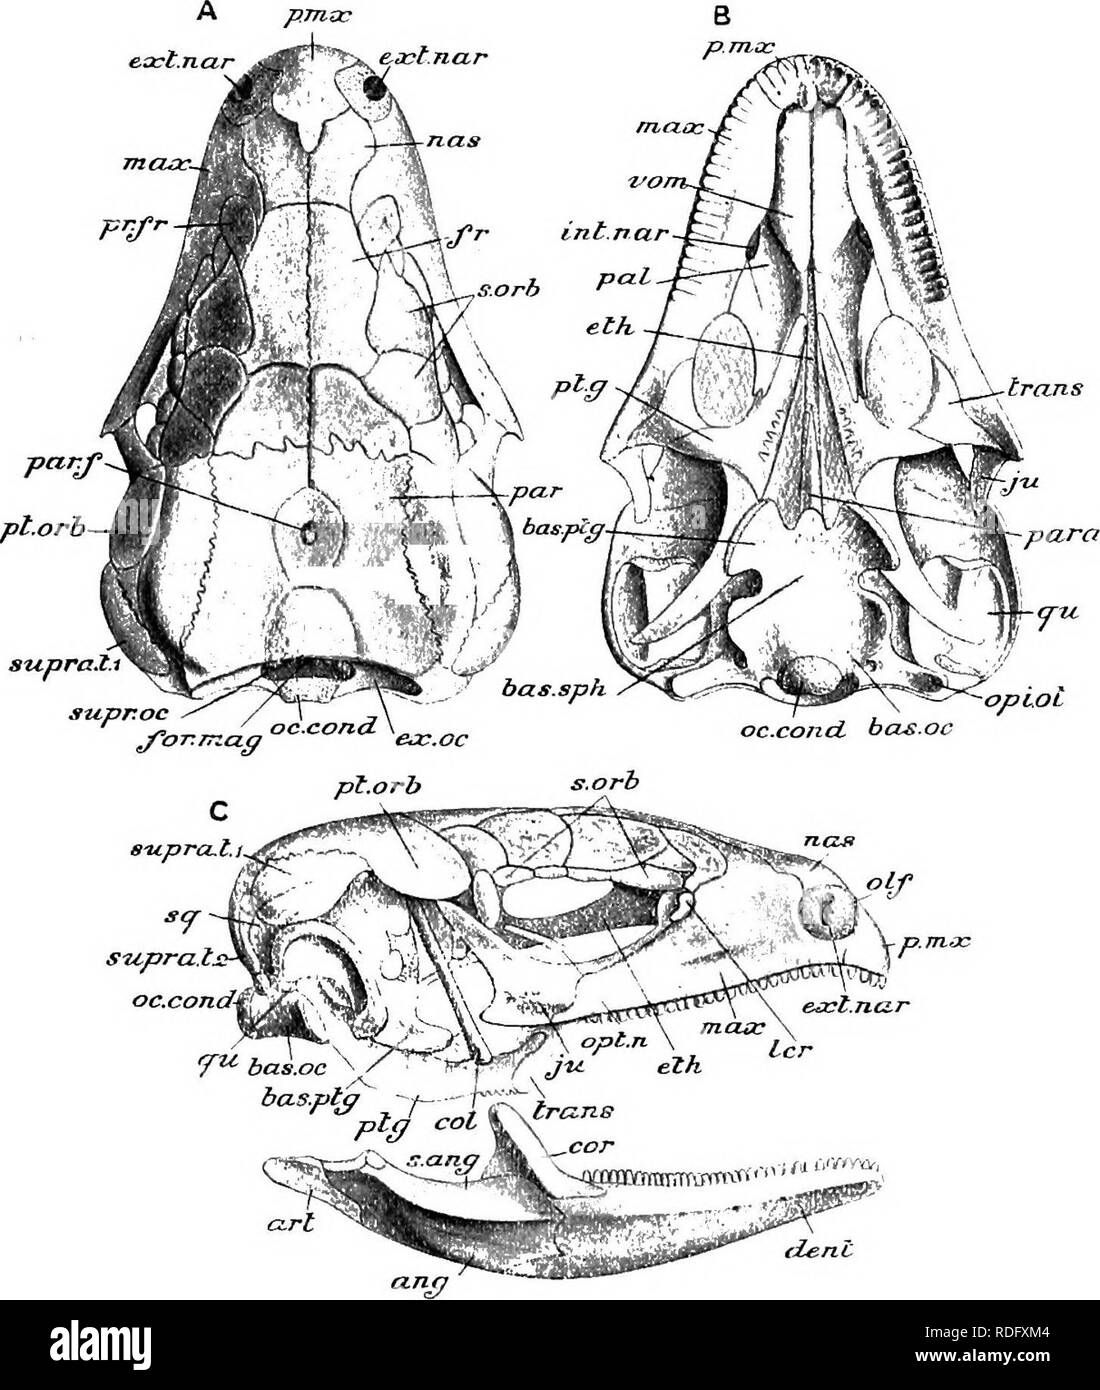 . Elements of the comparative anatomy of vertebrates. Anatomy, Comparative. THE SKULL 89 Excepting in the naso-ethmoidal region, the whole chondro- craniura usually becomes almost obliterated by an extensive process trans. Fig. 71.âI^ki'lt. of Larerta nijilin (from Parker and Haswell's Zoology, after W. K. Parker). A, from above ; B, from below ; C, from the aide, ang, angular; art, articular ; bas.oc, basioccipital; bax.ptg, basipterygoid processes; ban.sph, basi- sphenoid ; rol, epipterygoid ; cor, coronary; dent, dentary; eth, ethmoid ; ex. or, exocoipital; ext, nar, external nares ; for. m Stock Photo